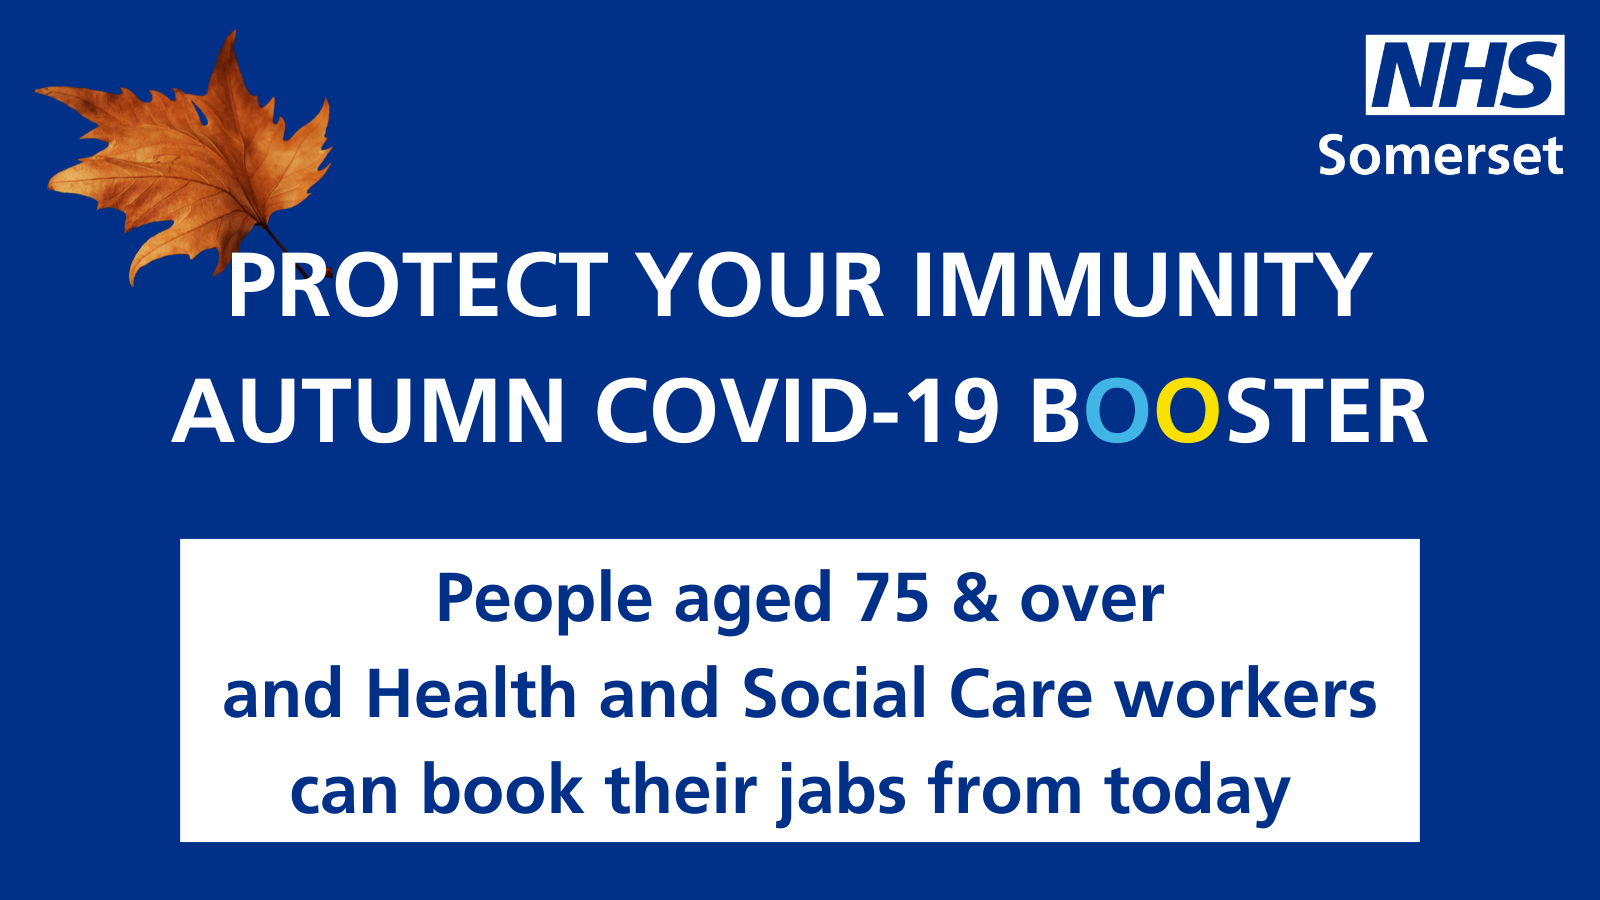 PROTECT YOUR IMMUNITY with the AUTUMN COVID-19 BOOSTER